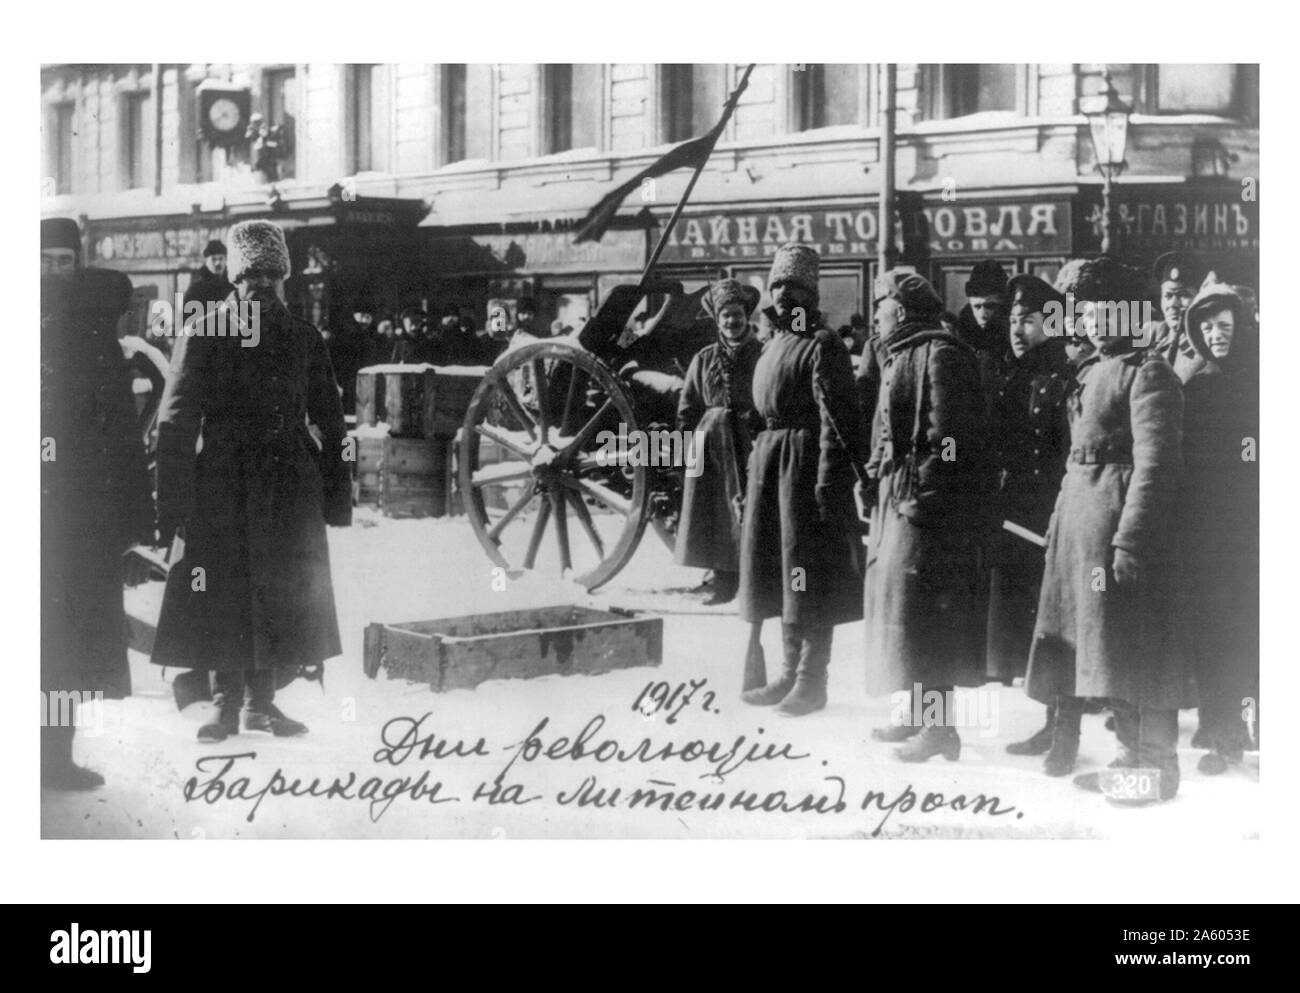 Days of revolution - barricades on the Liteinyi Prospect, Petrograd. People stand in front of the barricade on the streets of Saint Petrograd. The Russian Revolution is the collective term for a series of revolutions in Russia in 1917, which dismantled the Tsarist autocracy and led to the creation of the Russian SFSR. Stock Photo